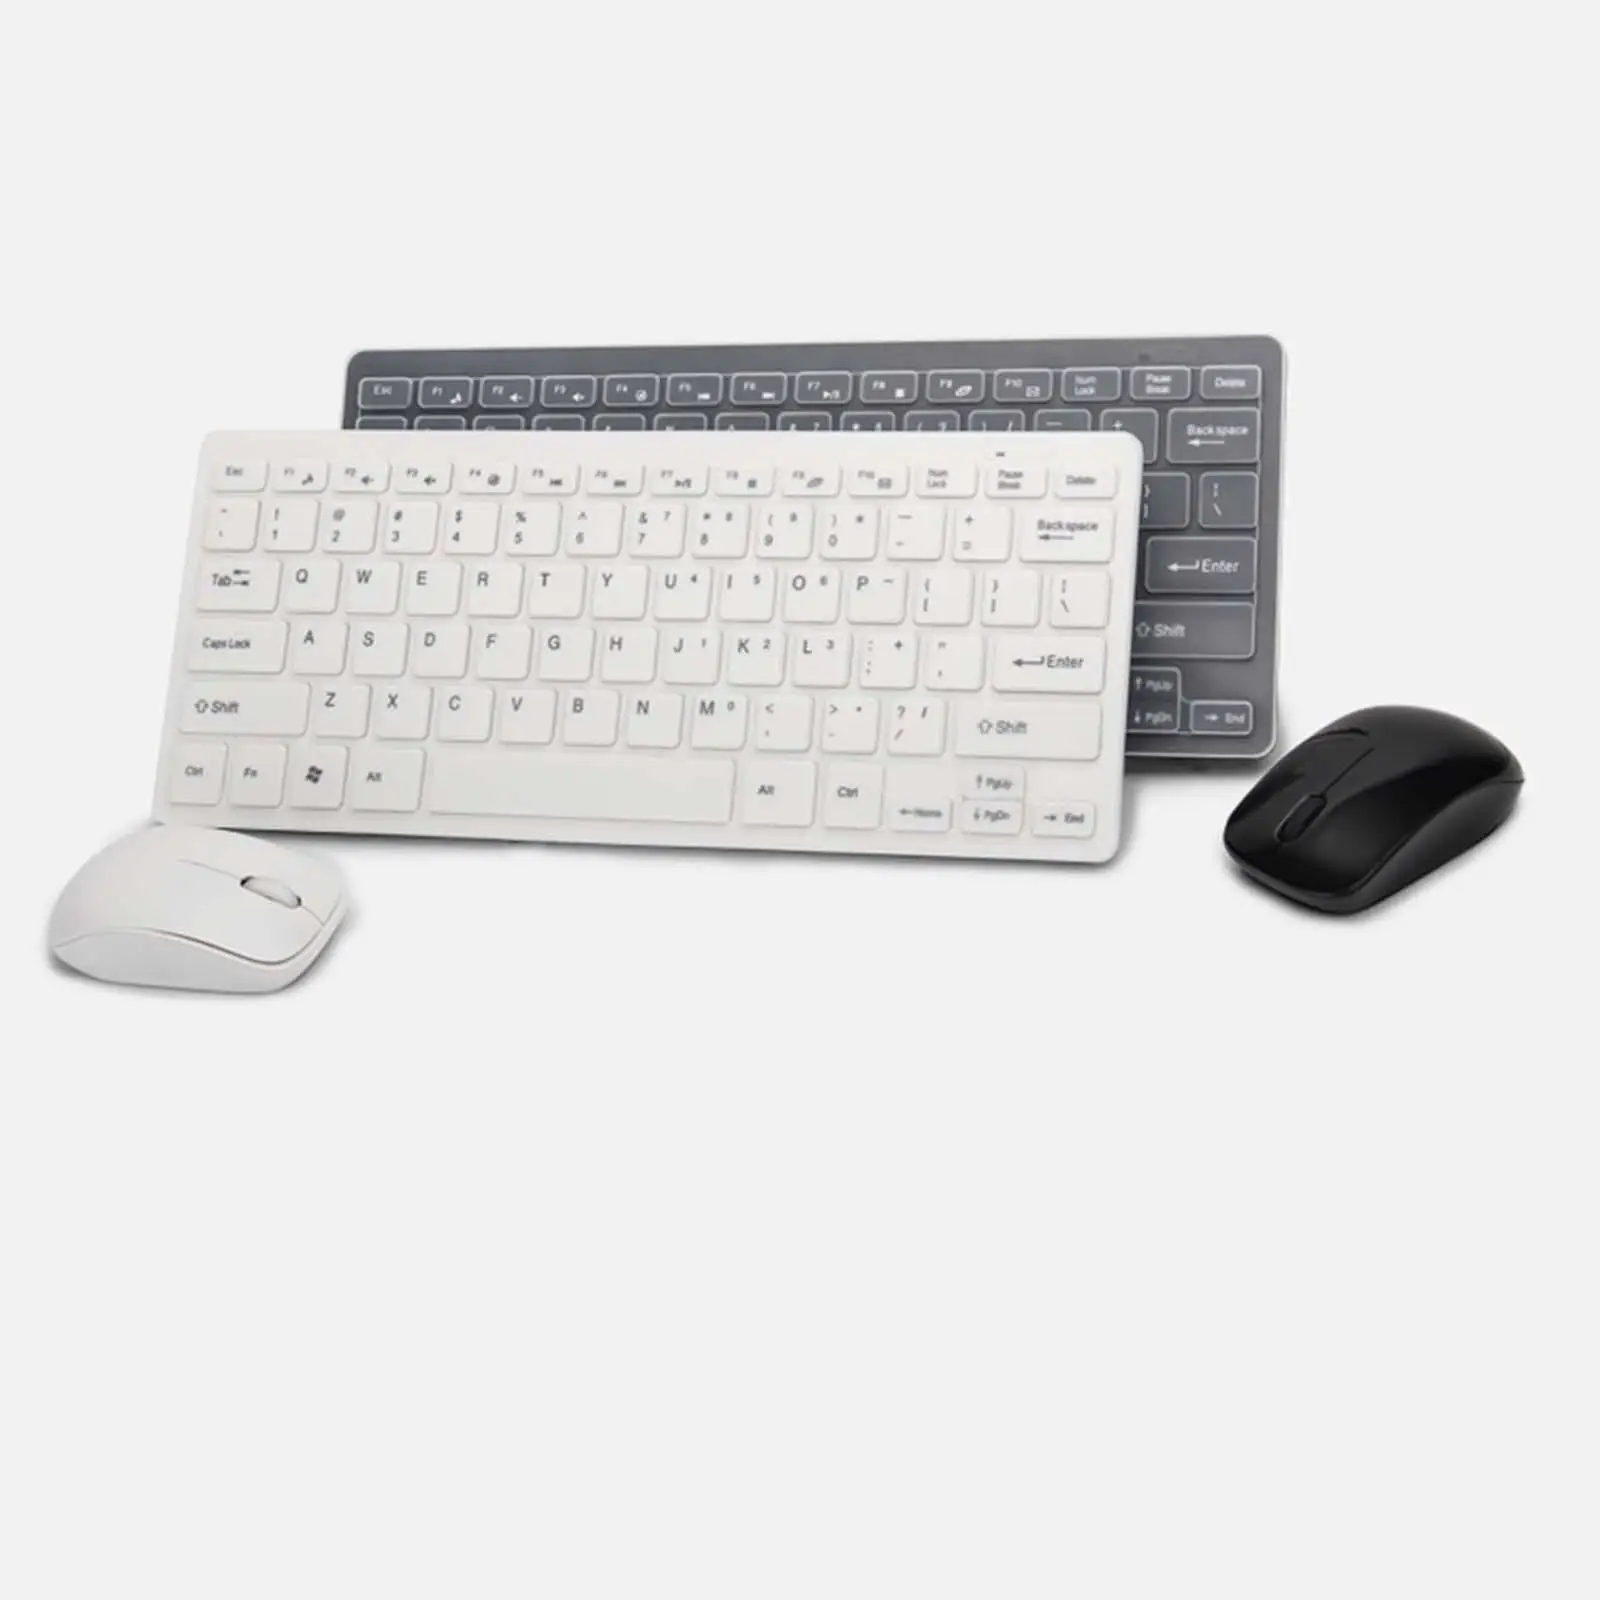 Keyboard and Mouse Combo US Layout Fully Intelligent Sleep Multimedia Functions for Notebook for Windows Vista 7/8/10